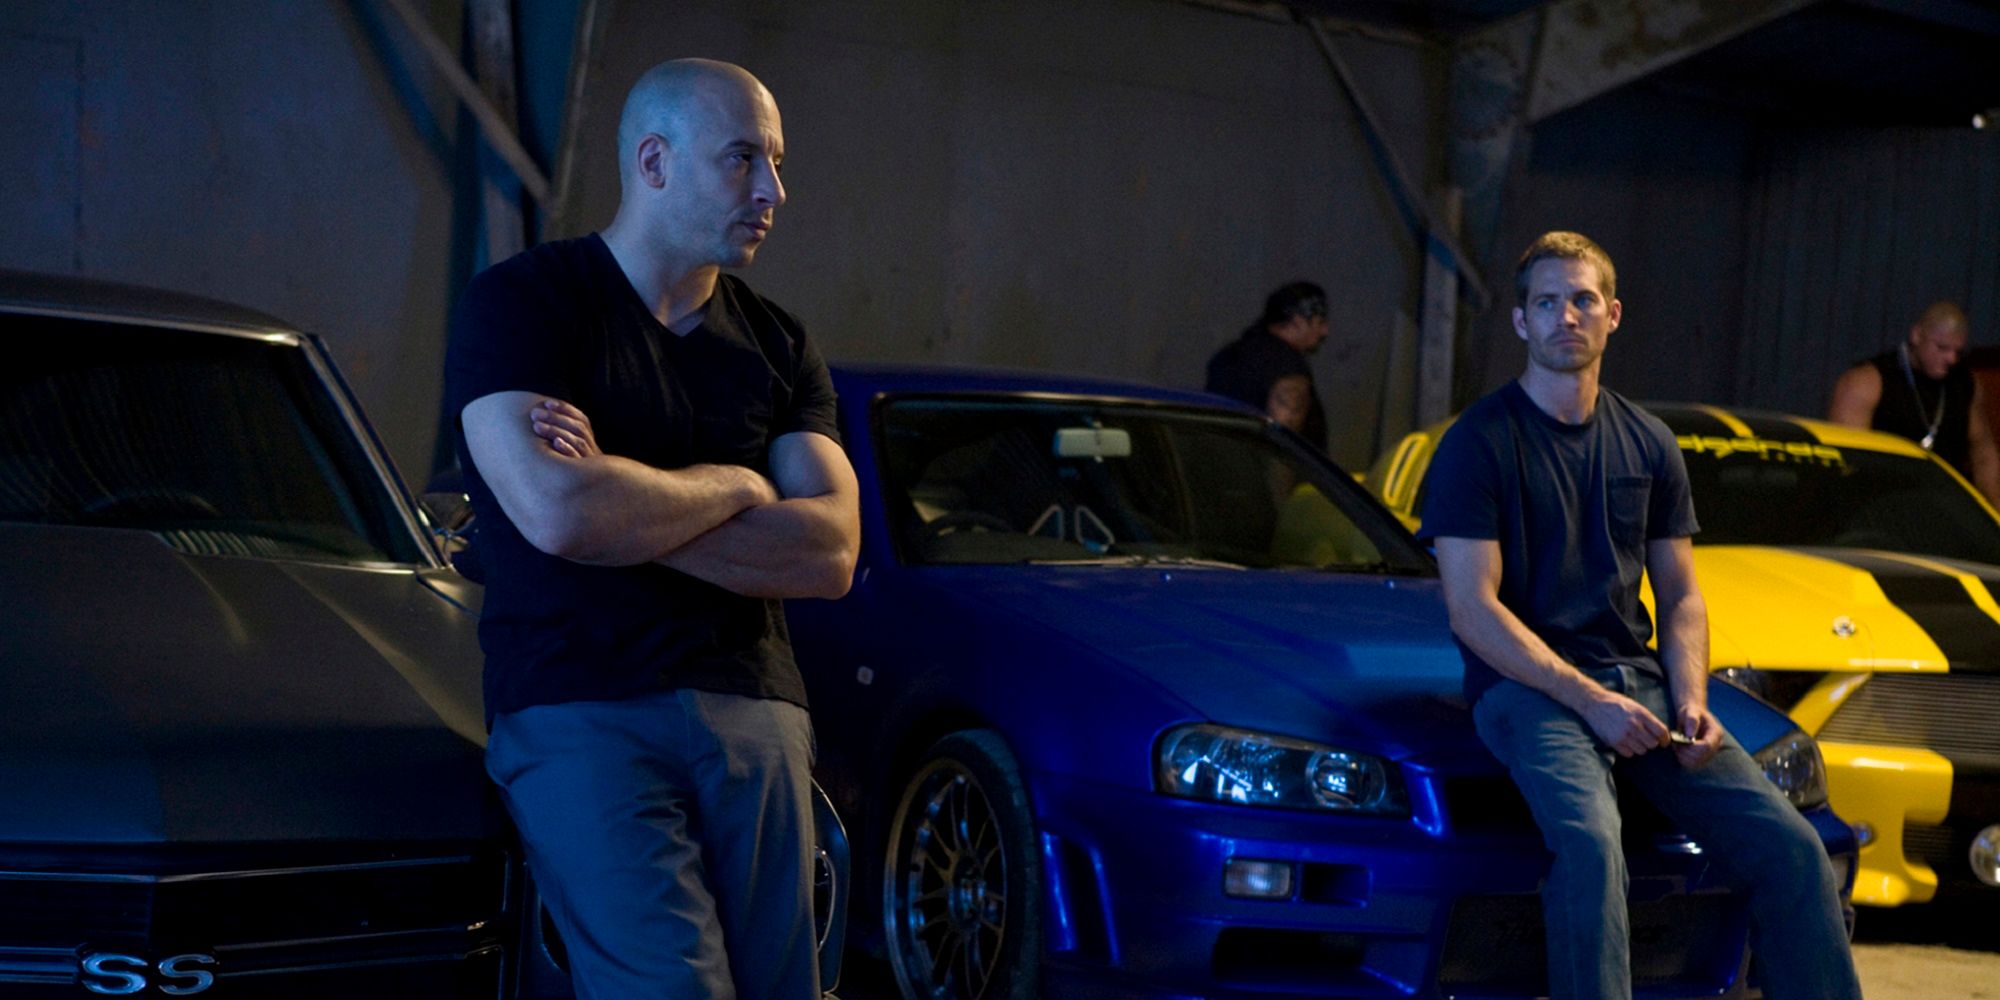 Vin Diesel and Paul Walker in The Fast and the Furious